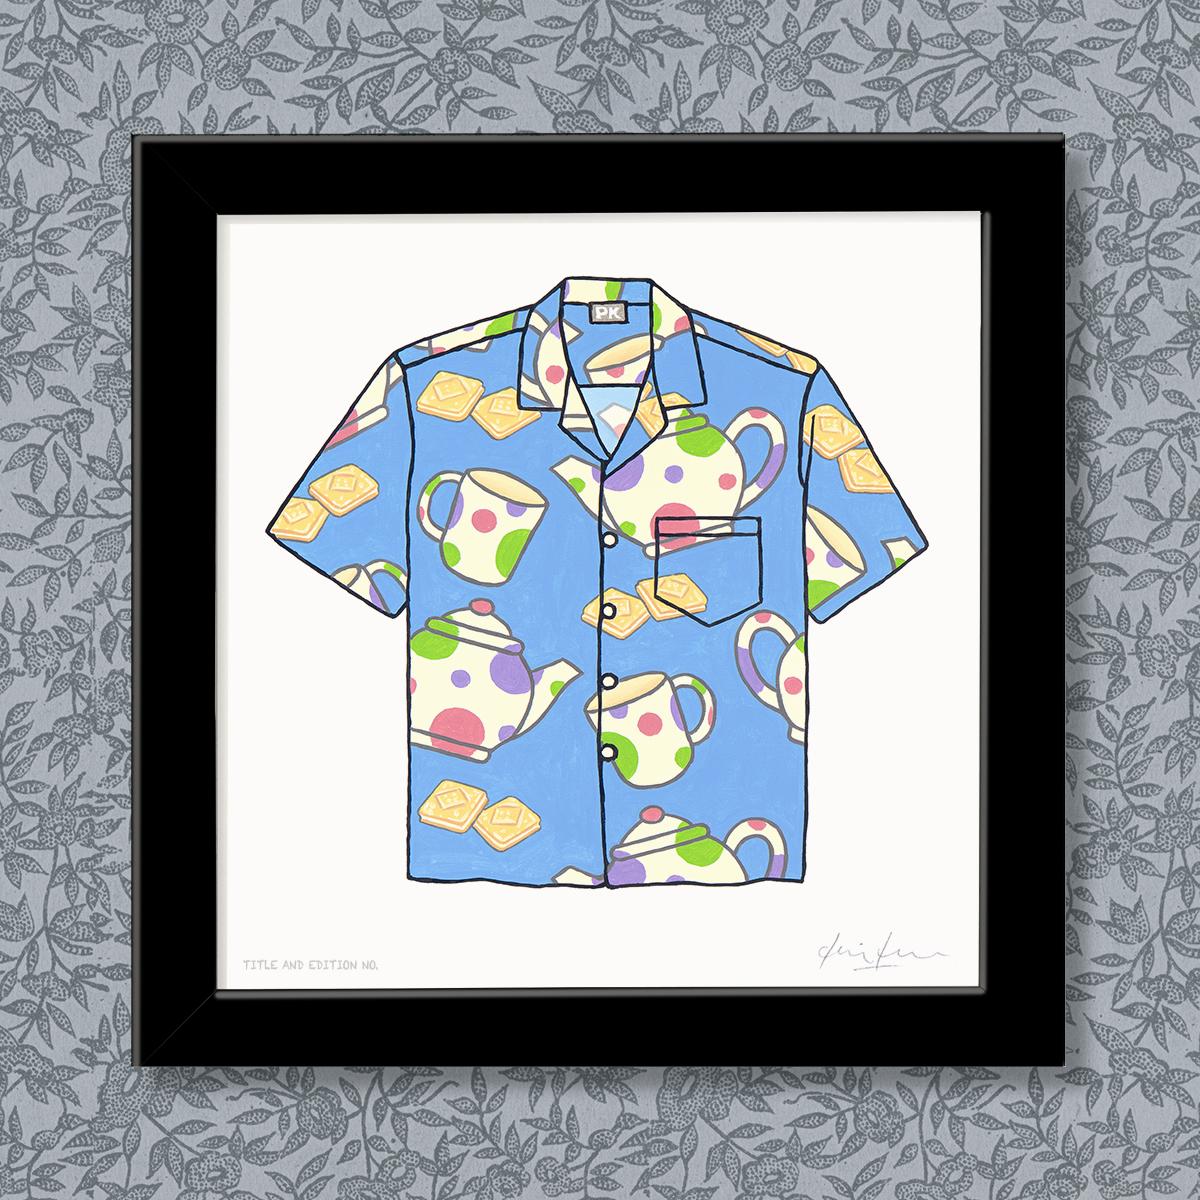 Limited edition print - Very Loud Shirt - in black frame